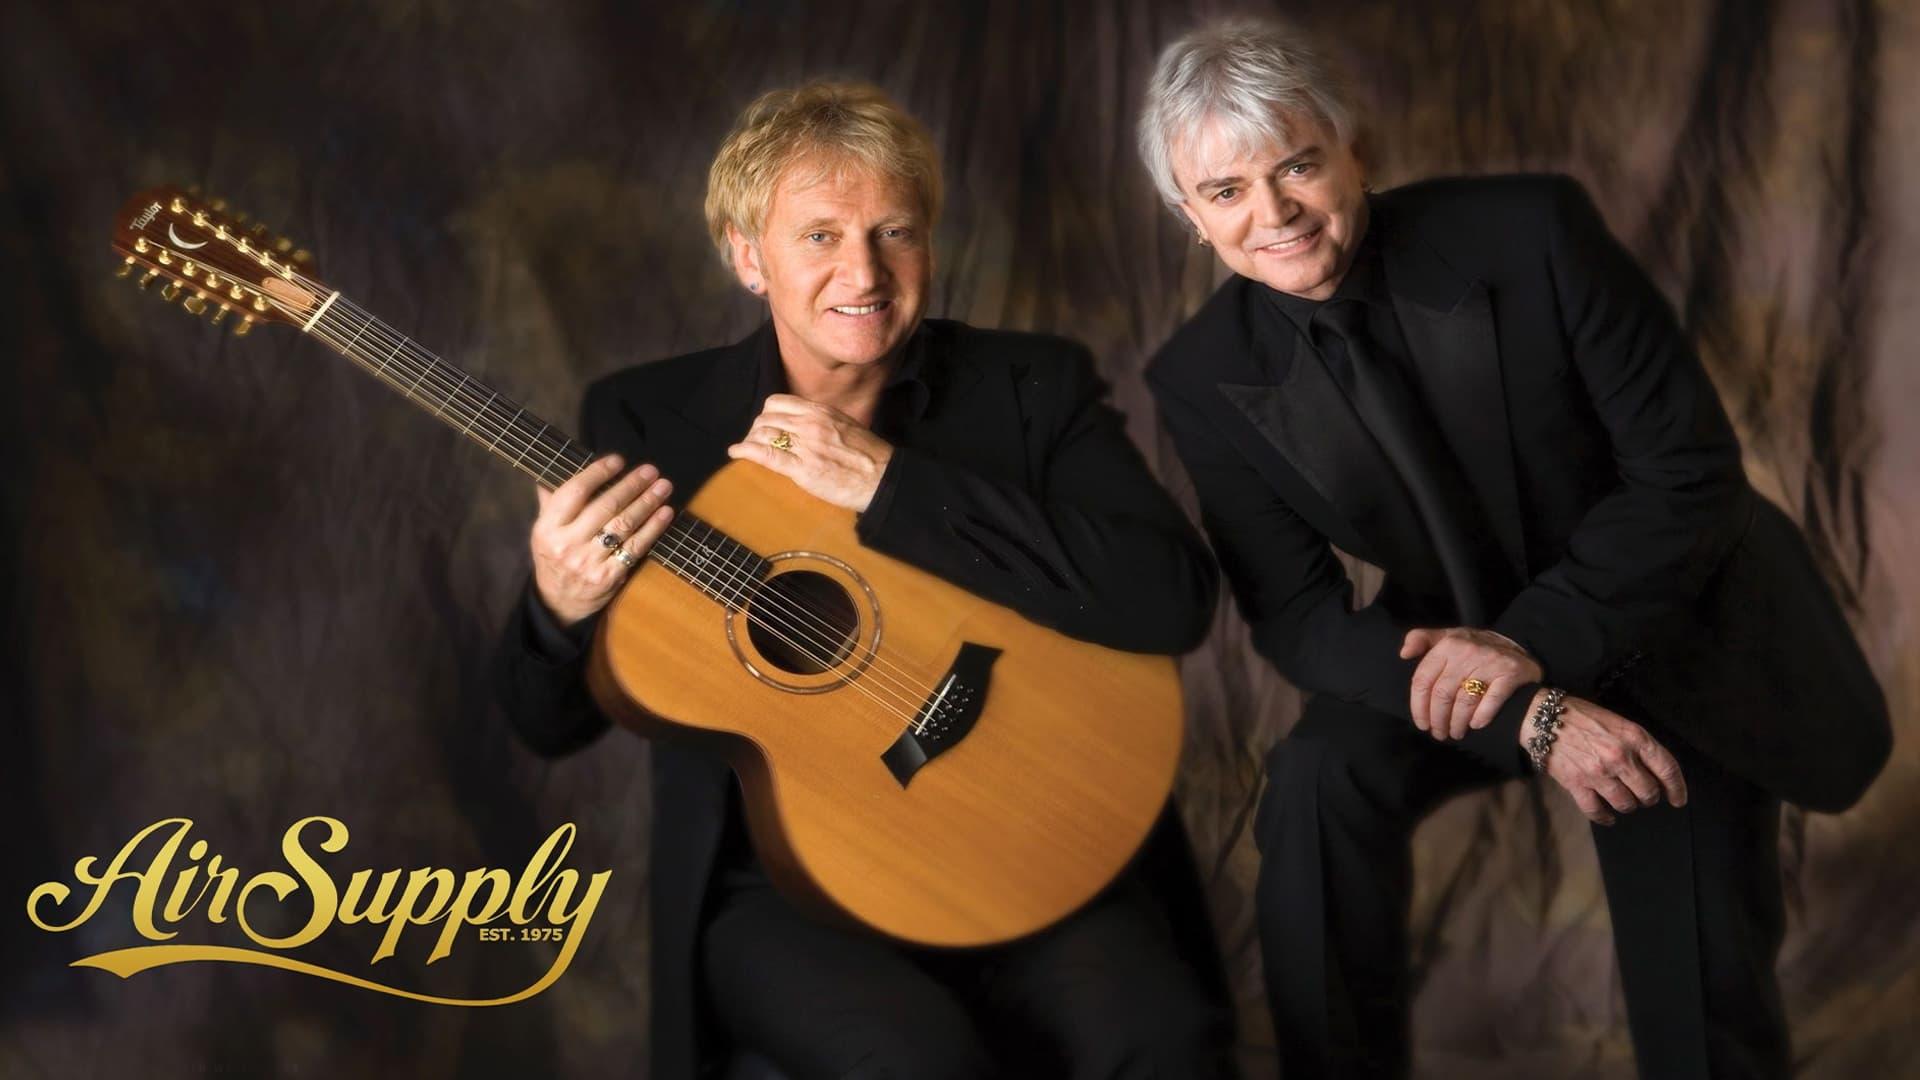 Air Supply - The Definitive DVD Collection backdrop